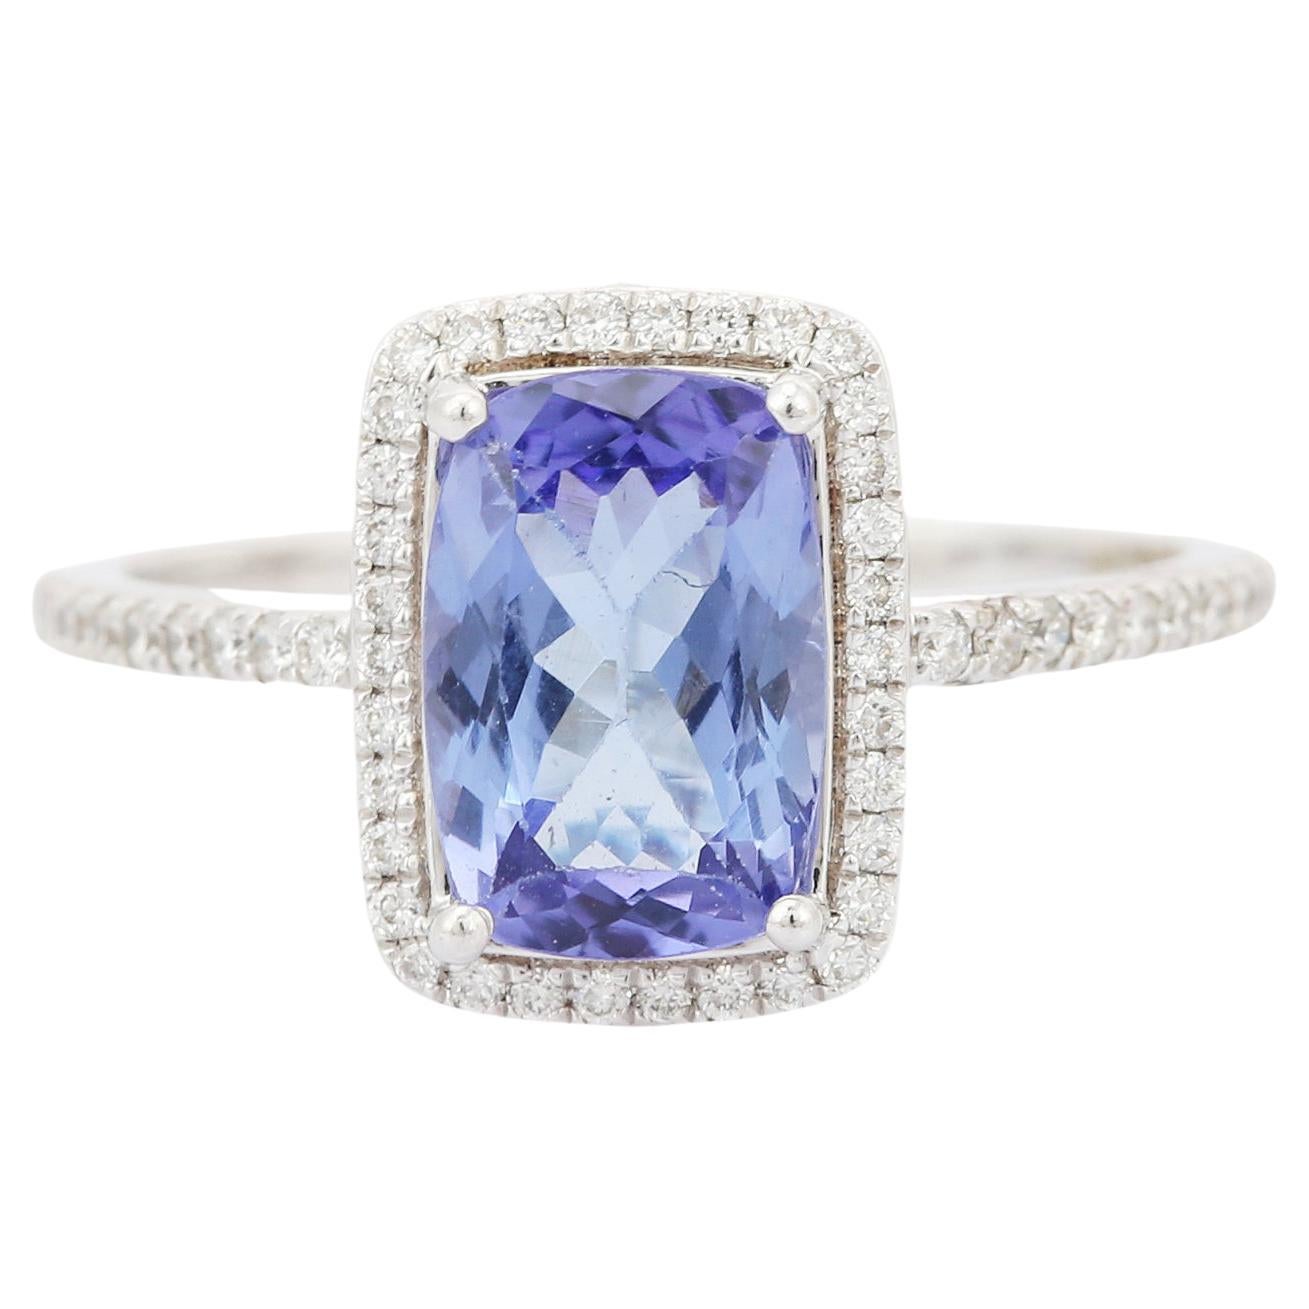 For Sale:  1.76 Carat Tanzanite and Diamond Ring in 18K White Gold